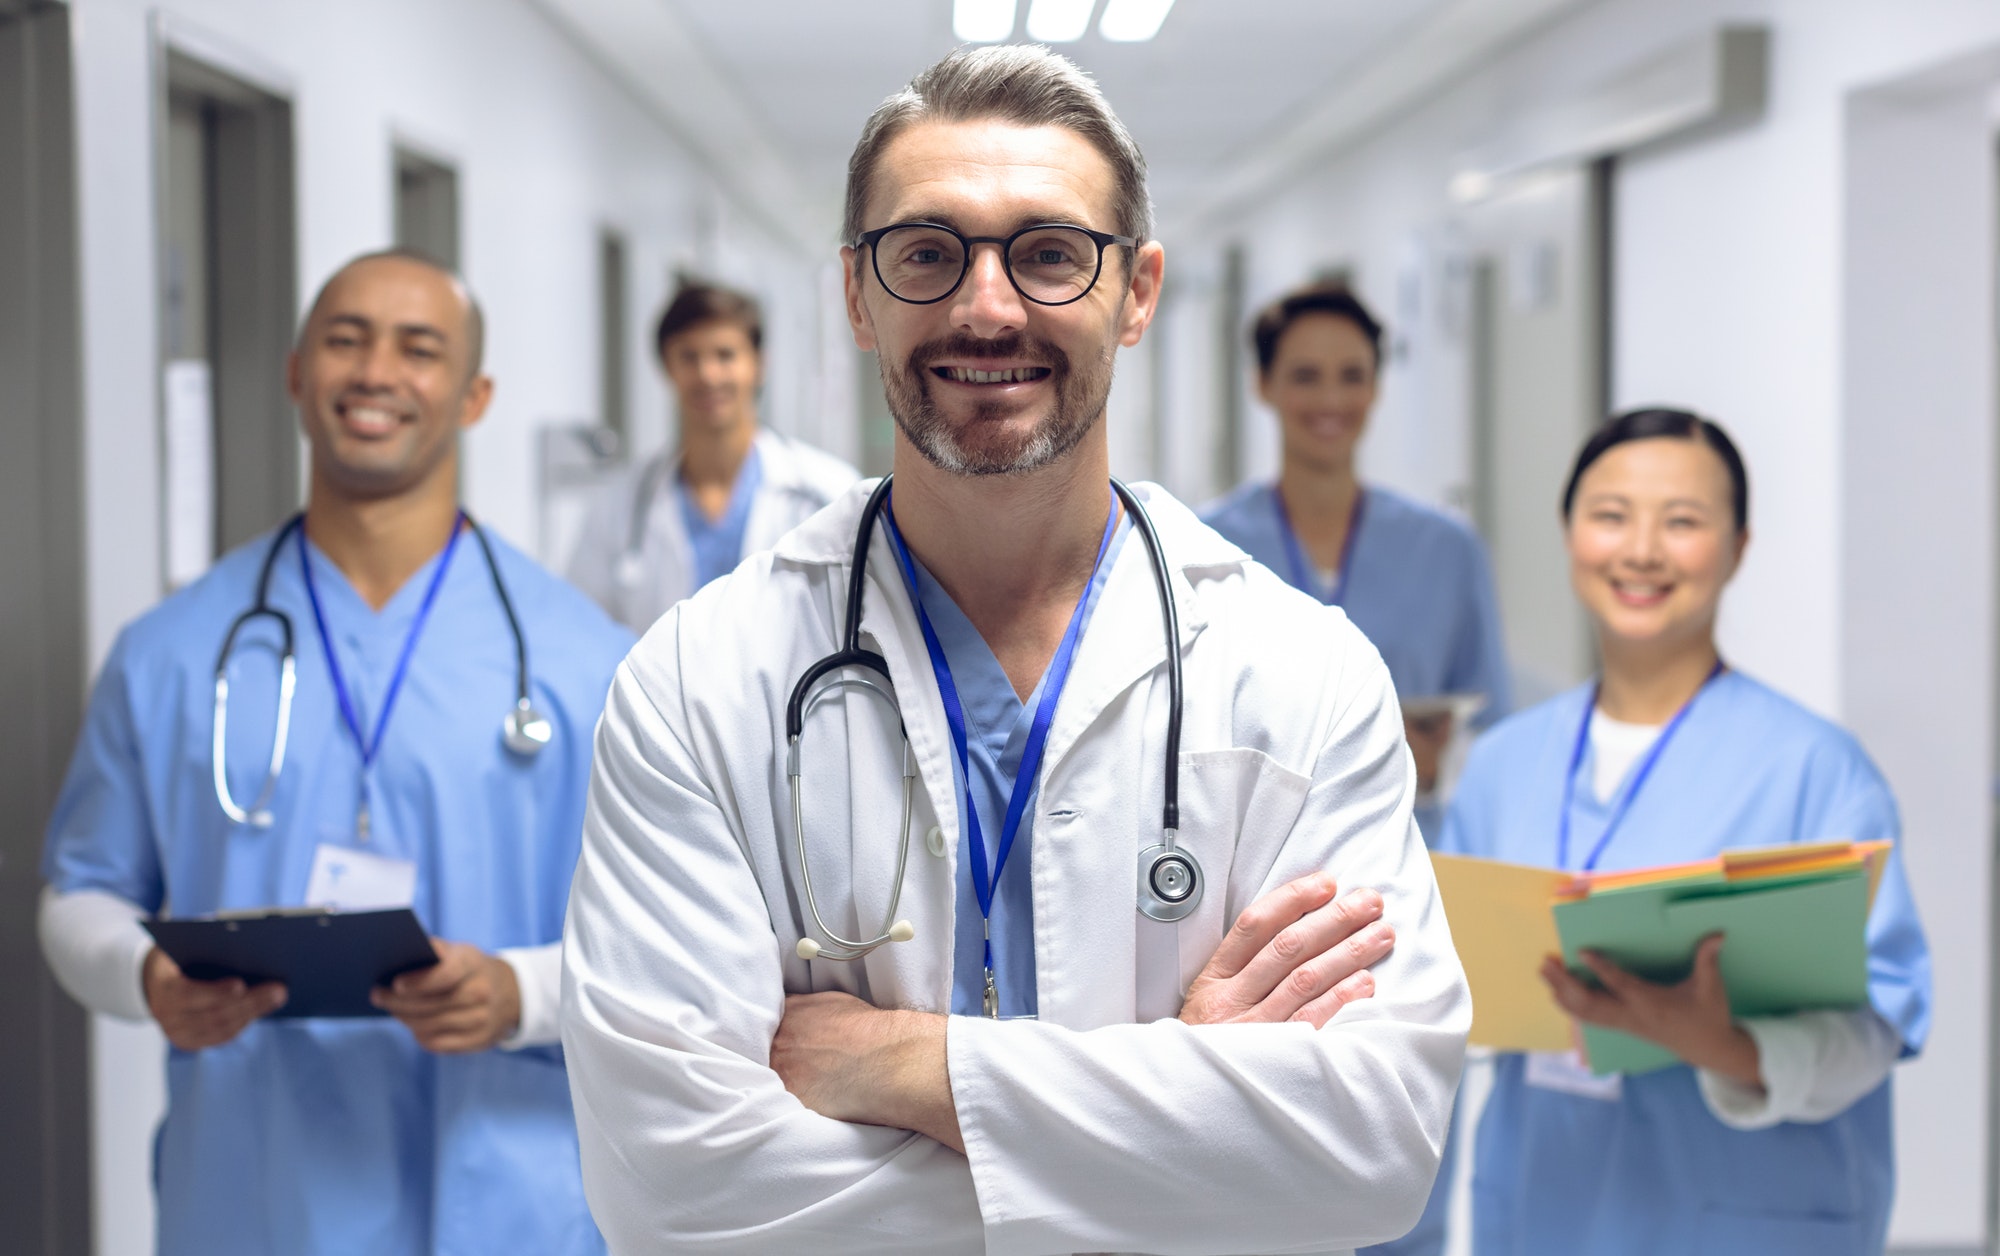 diverse-medical-team-of-doctors-looking-at-camera-while-holding-clipboard-and-medical-files.jpg